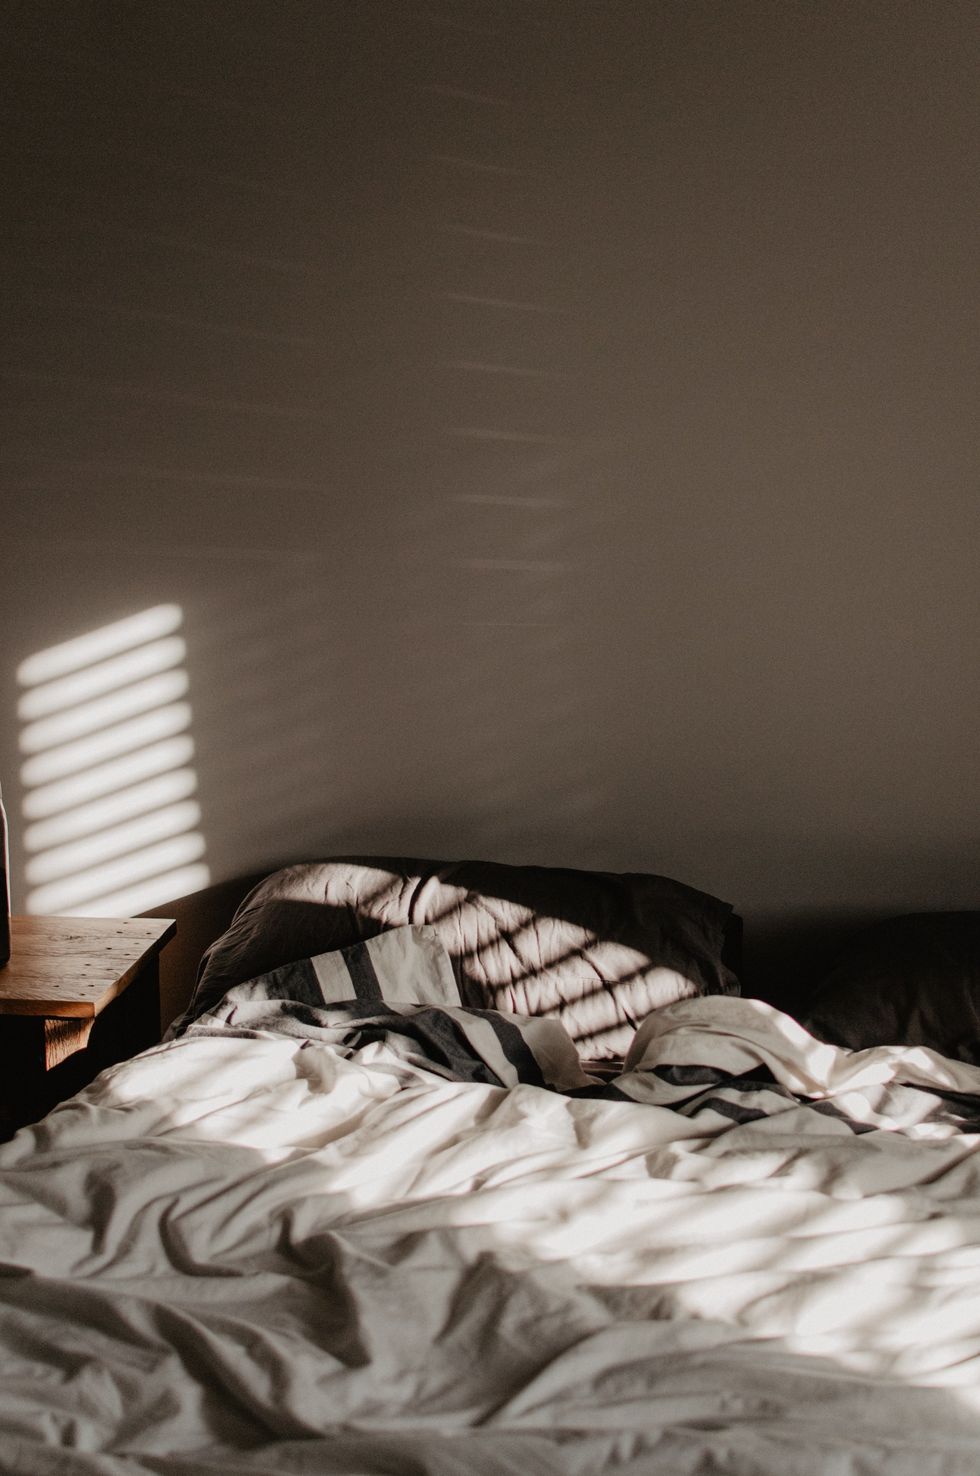 10 Things You Can Do To Get A Good Night's Sleep When You Have Insomnia